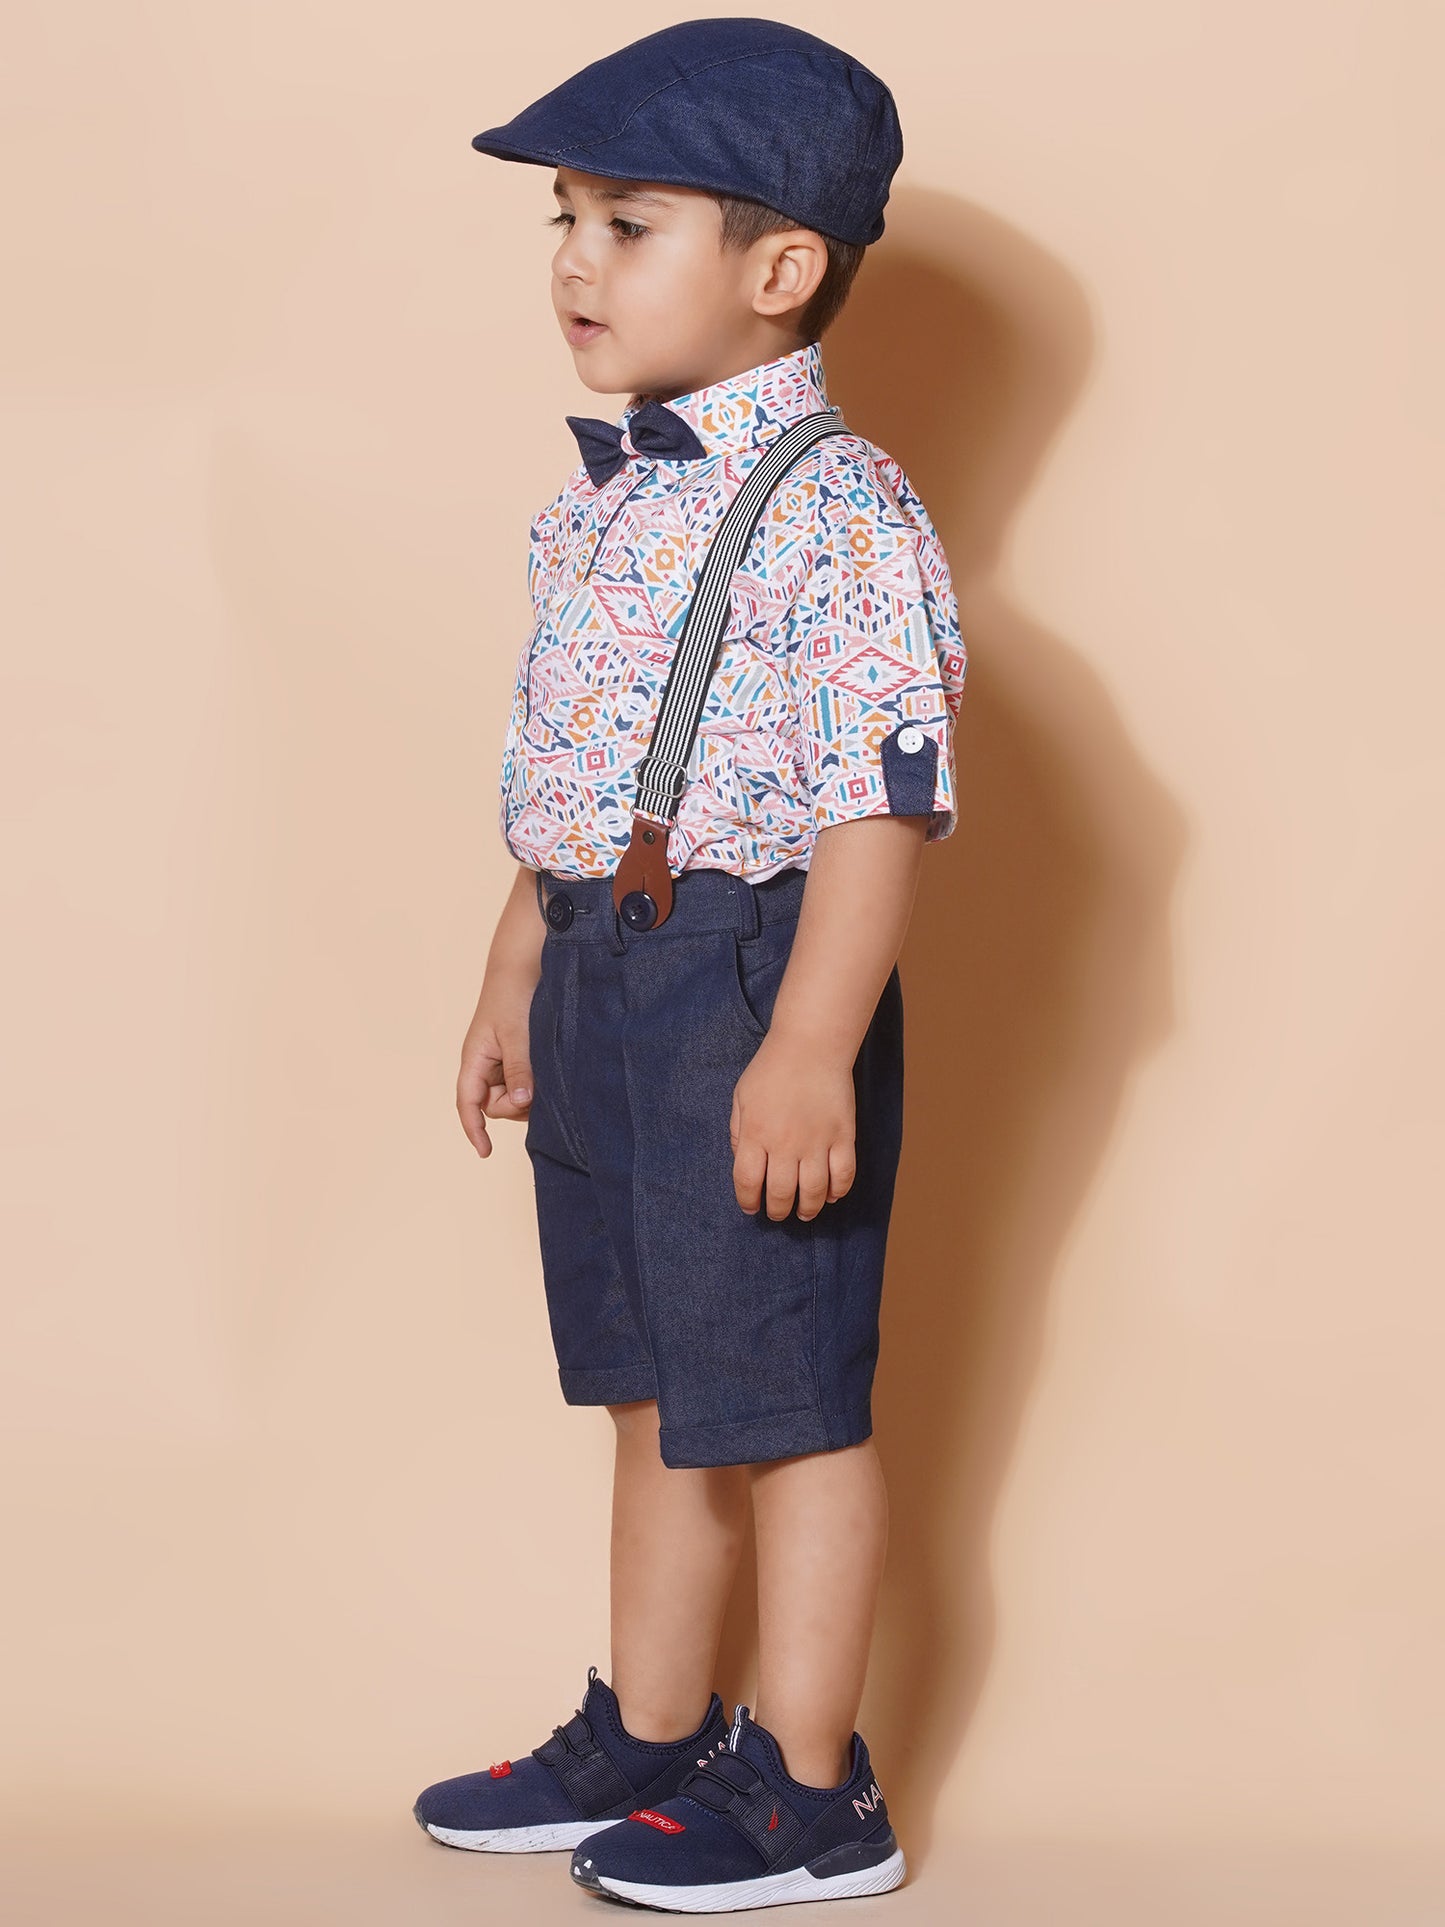 Boys Kids Pink Cotton Printed Shirt Shorts With Cap and Suspender Set